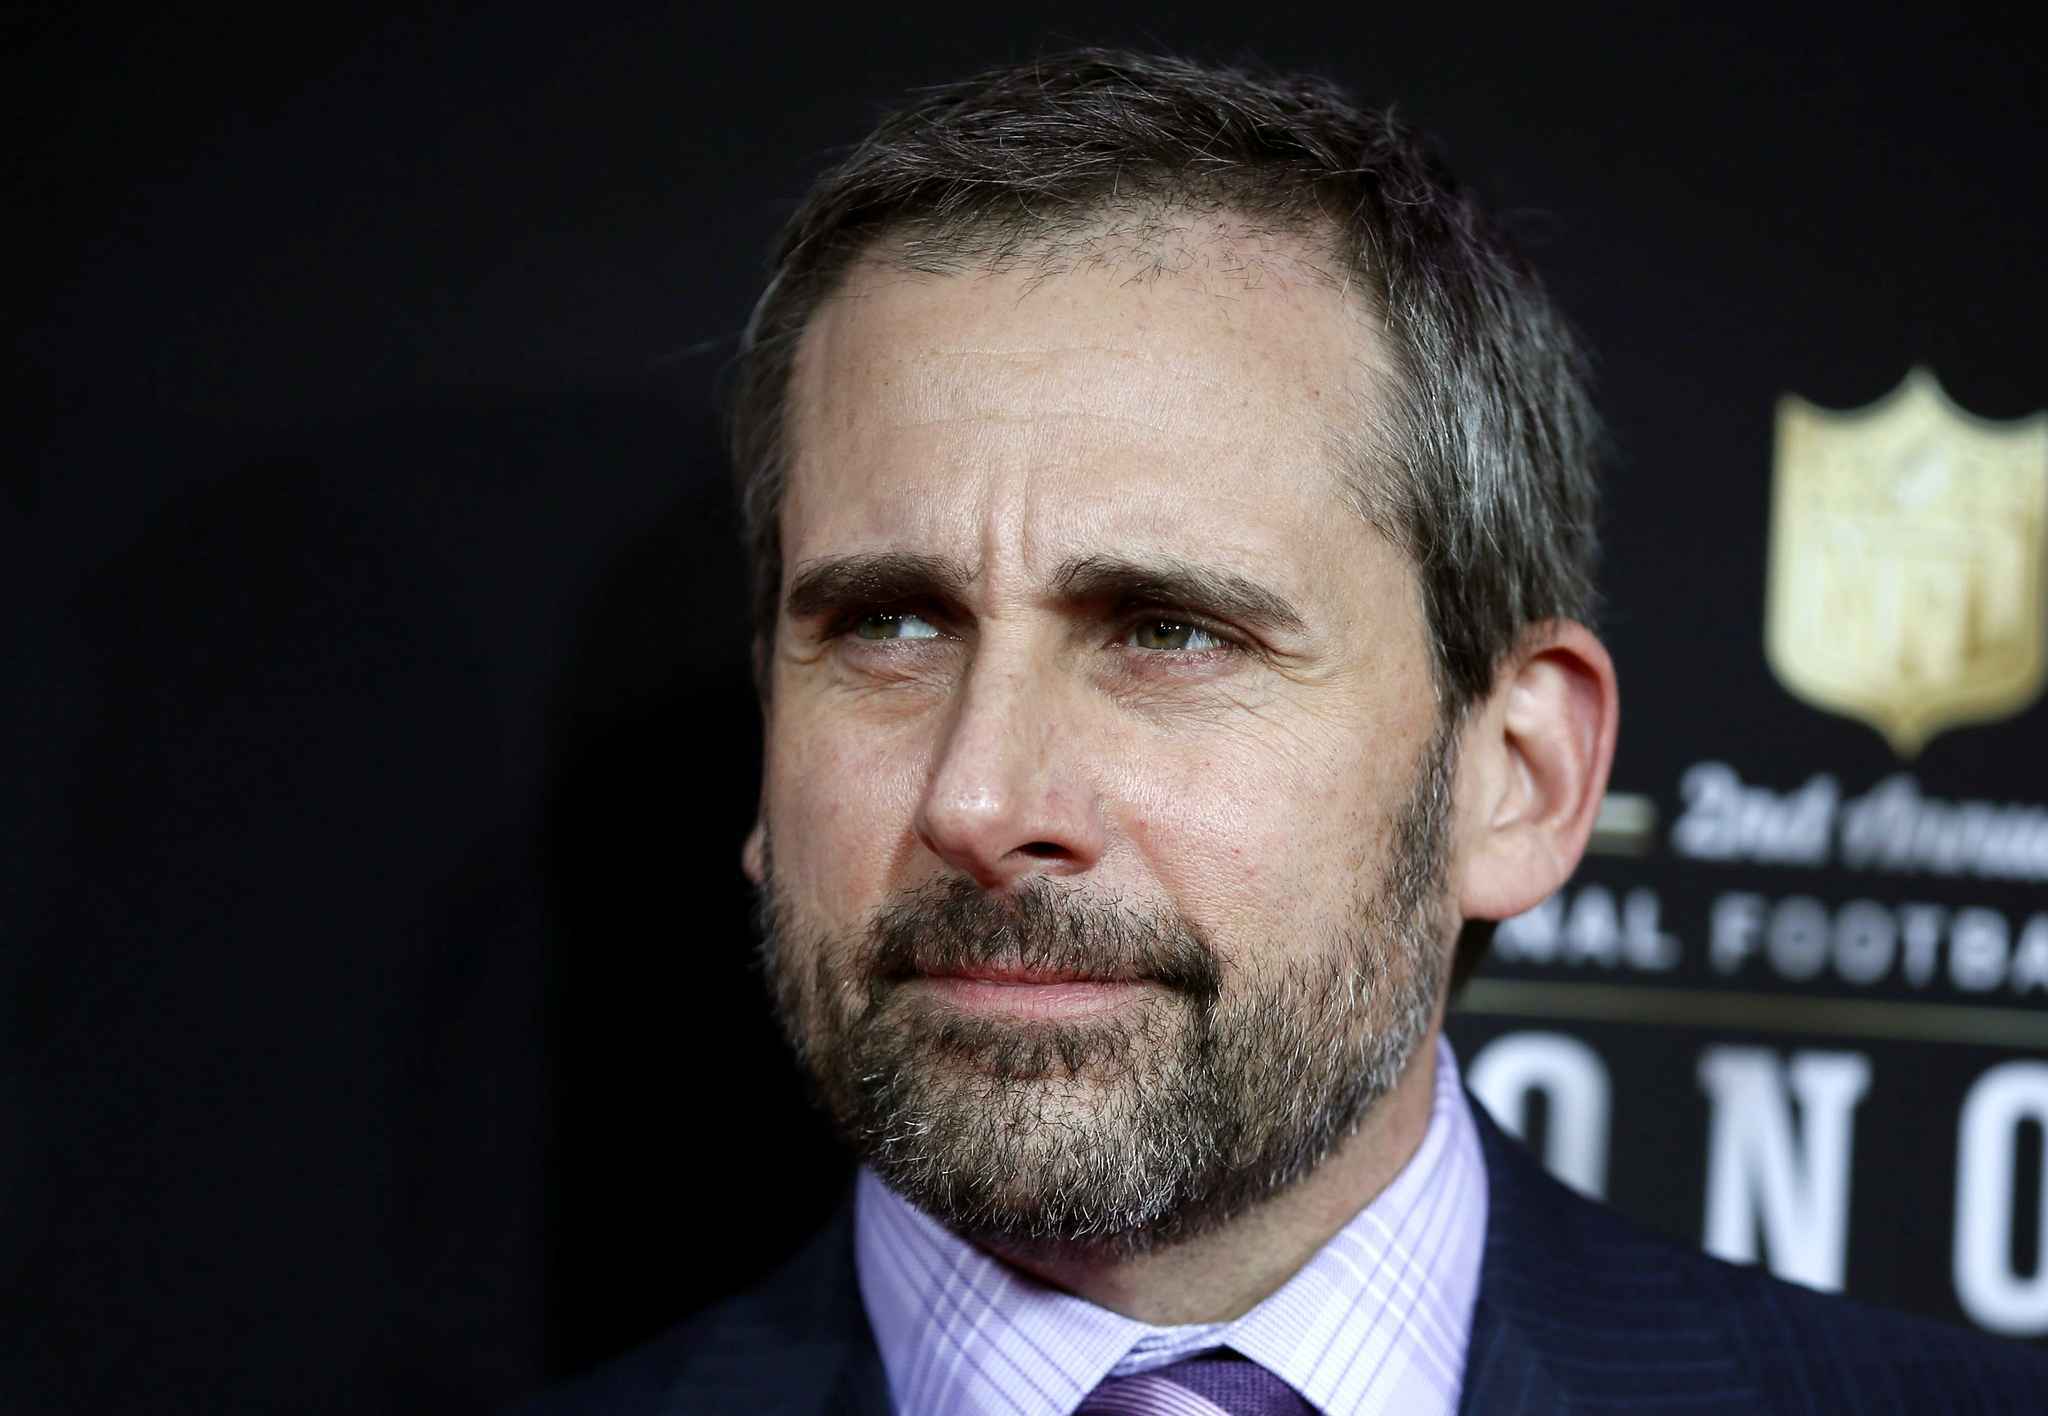 Free Download Steve Carell Images on our website with great care. 